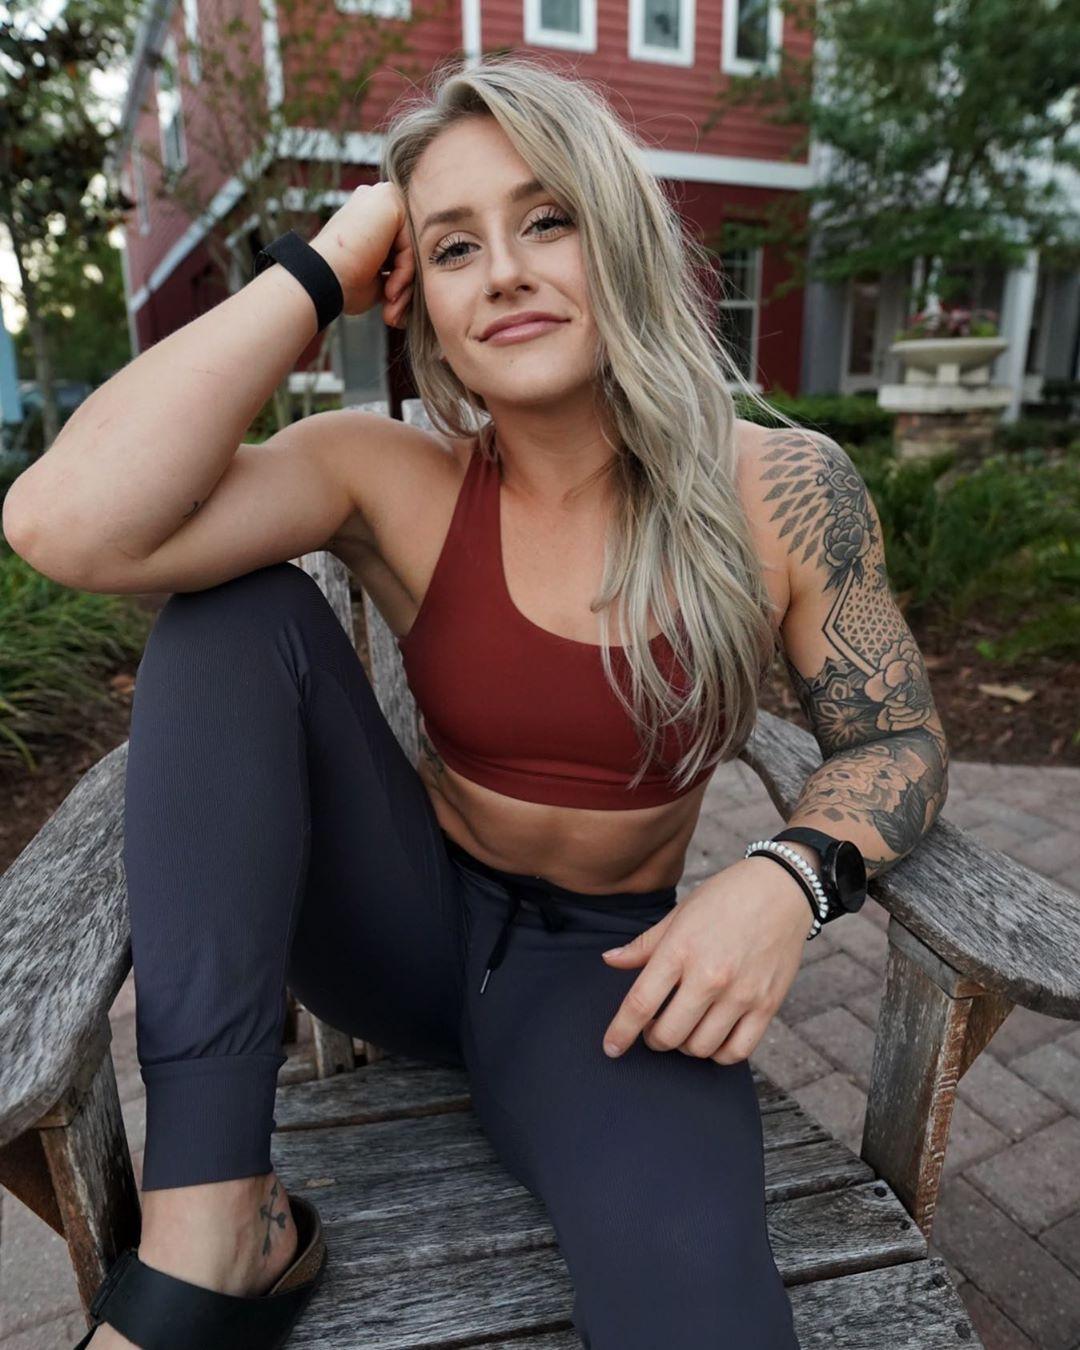 51 Hot Pictures Of Josie Hamming That Will Fill Your Heart With Joy A Success 26